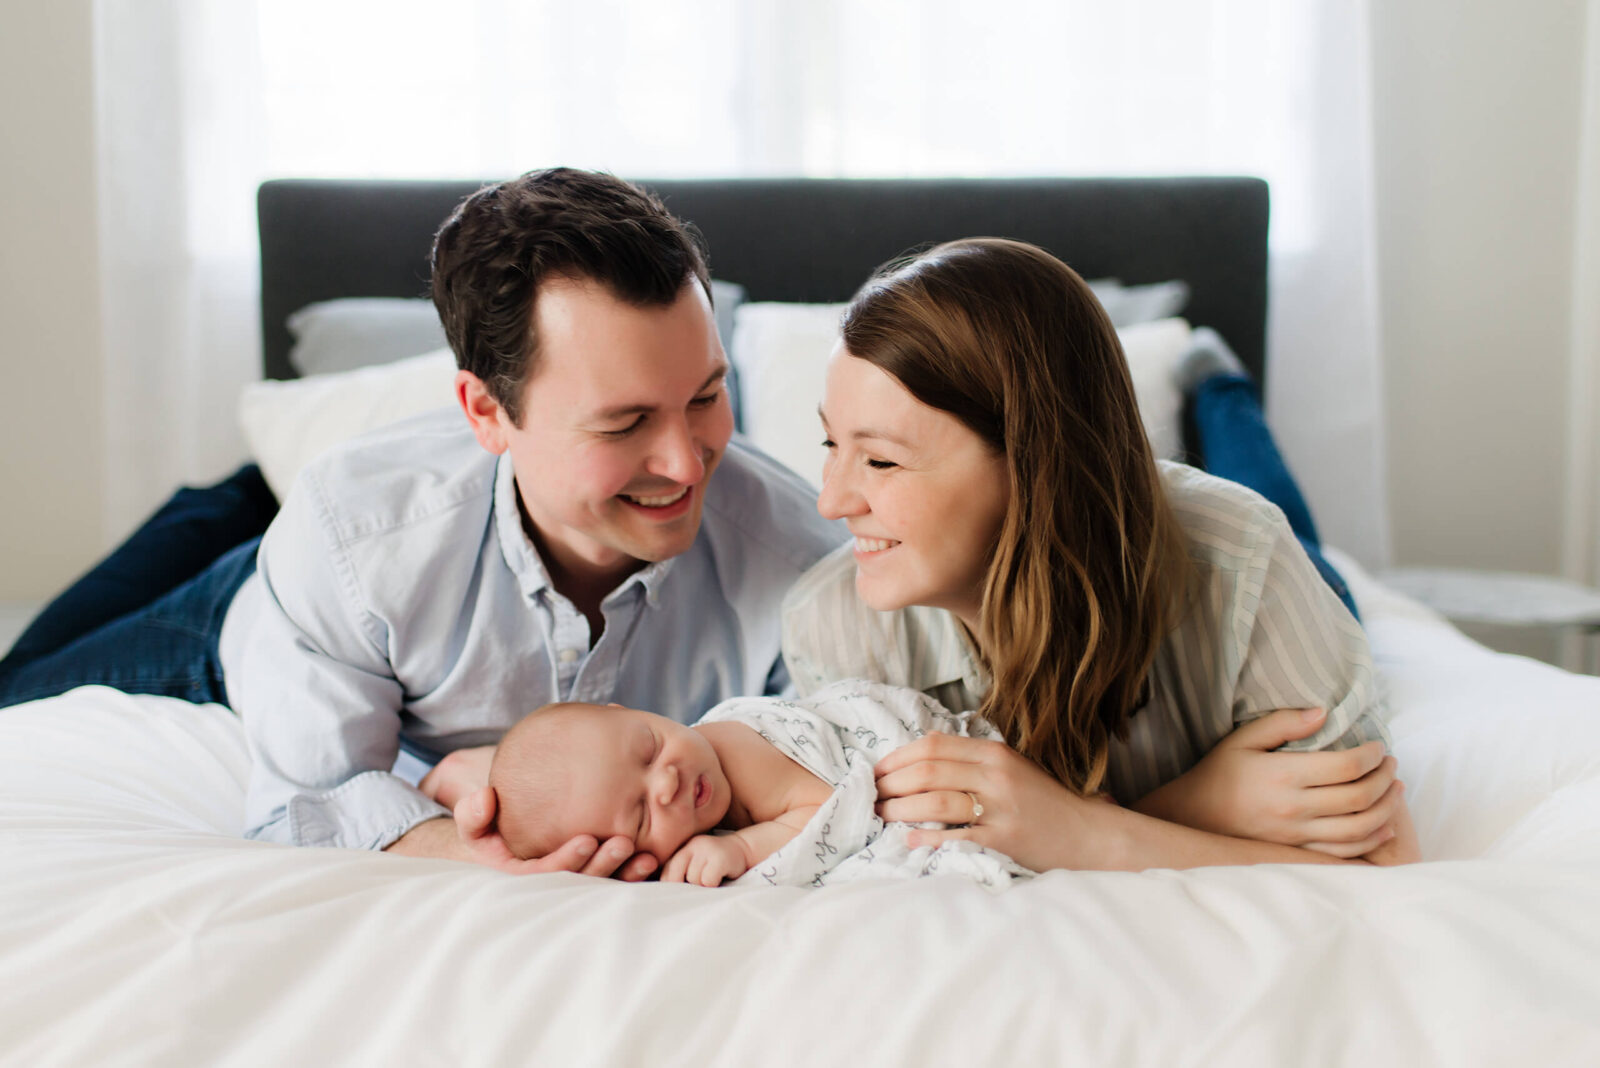 A sample photo from an in-home newborn photo shoot